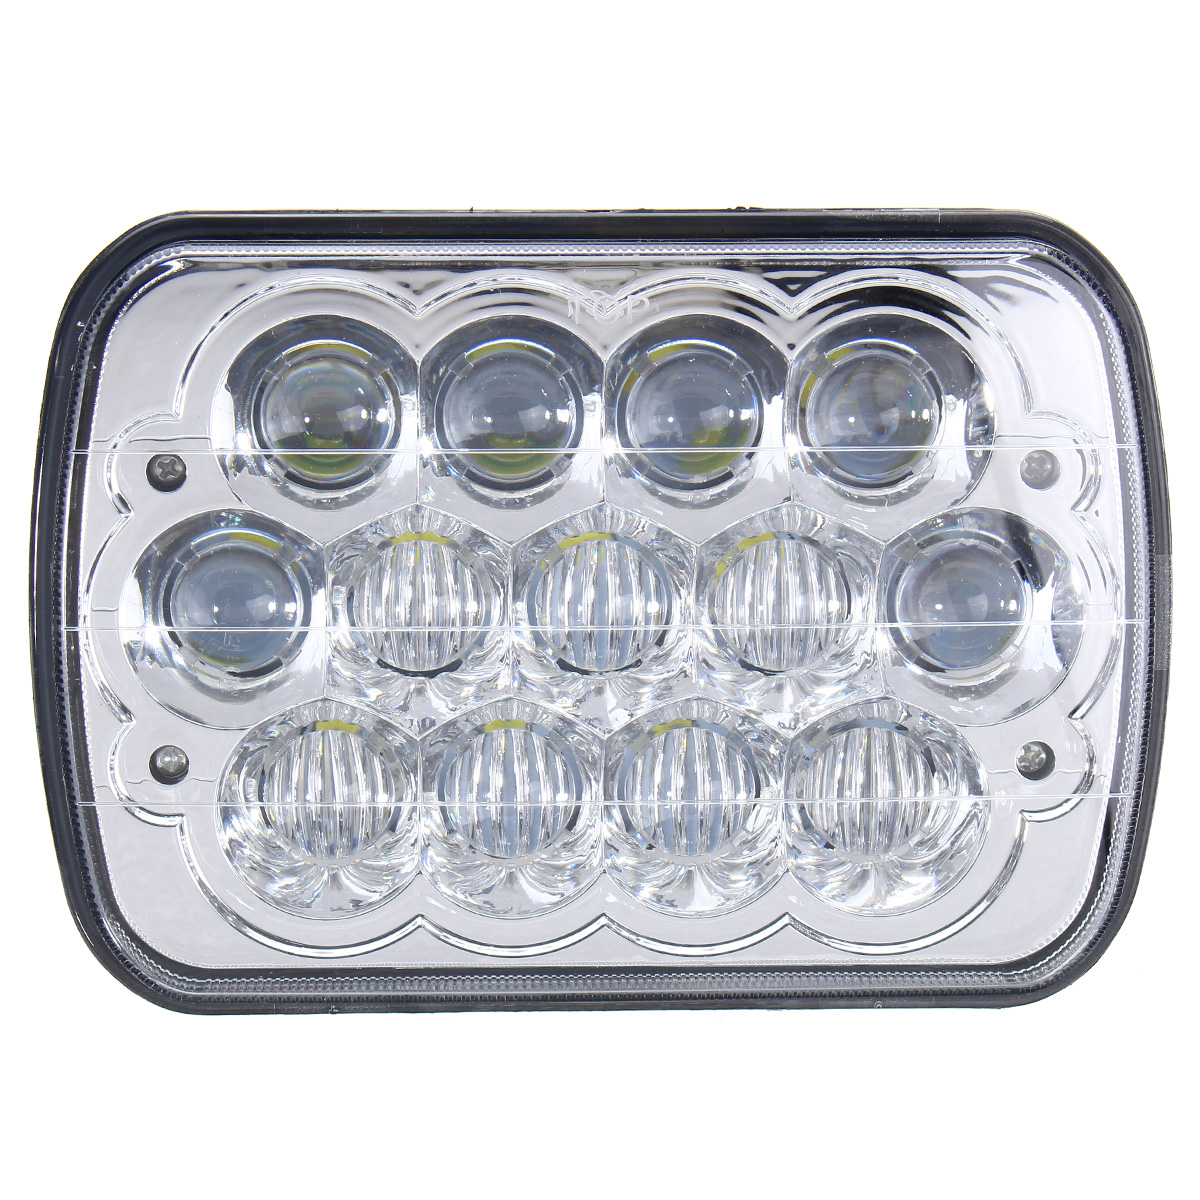 5X7 Inch H4 13 LED Headlights High Low Dual Beam Light with Atmosphere Lamp DC9-32V 40W for Jeep Grand Cherokee Dodge